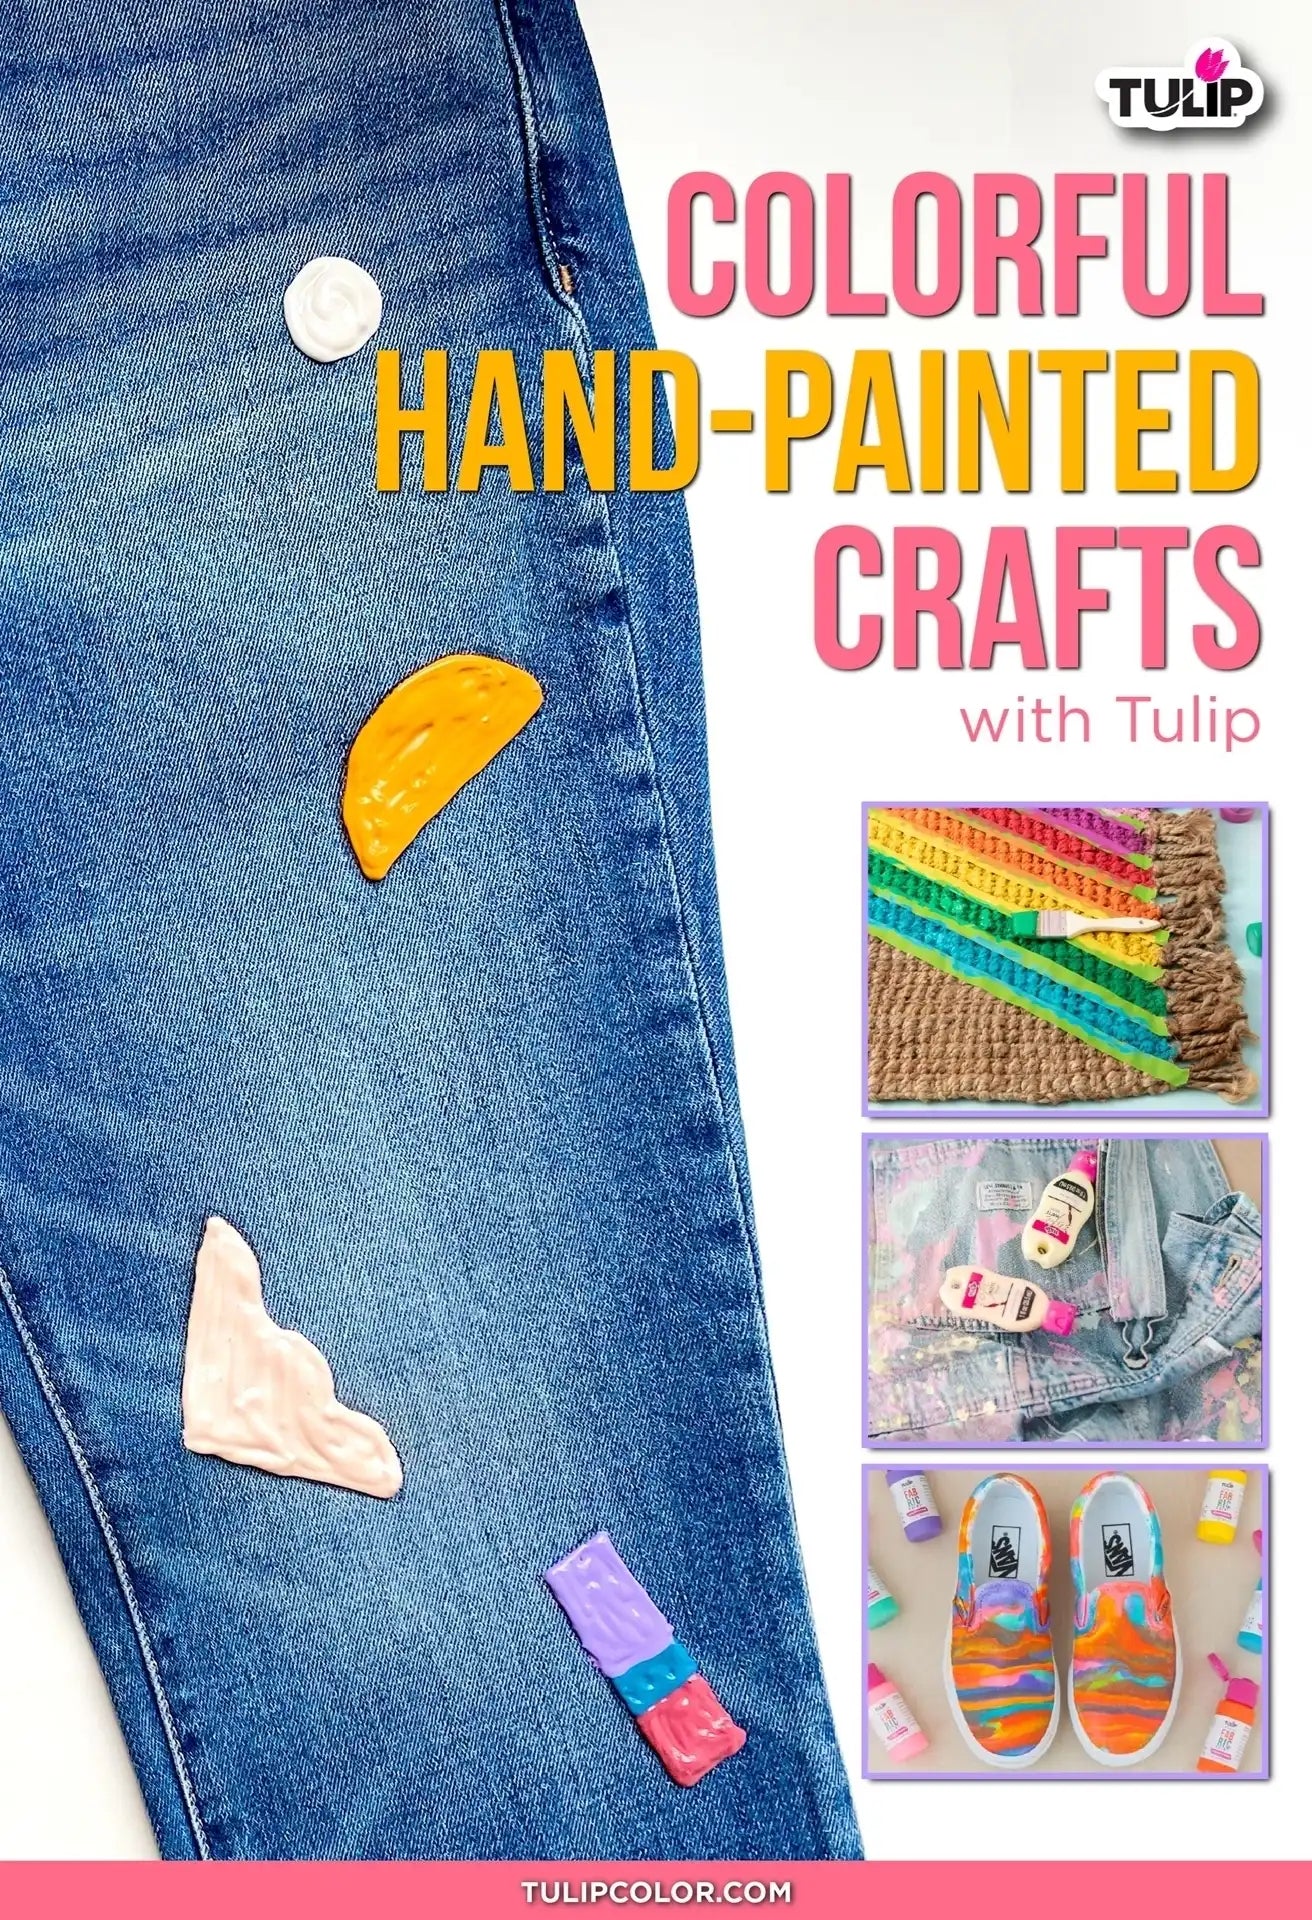 5 Colorful Hand-Painted Crafts